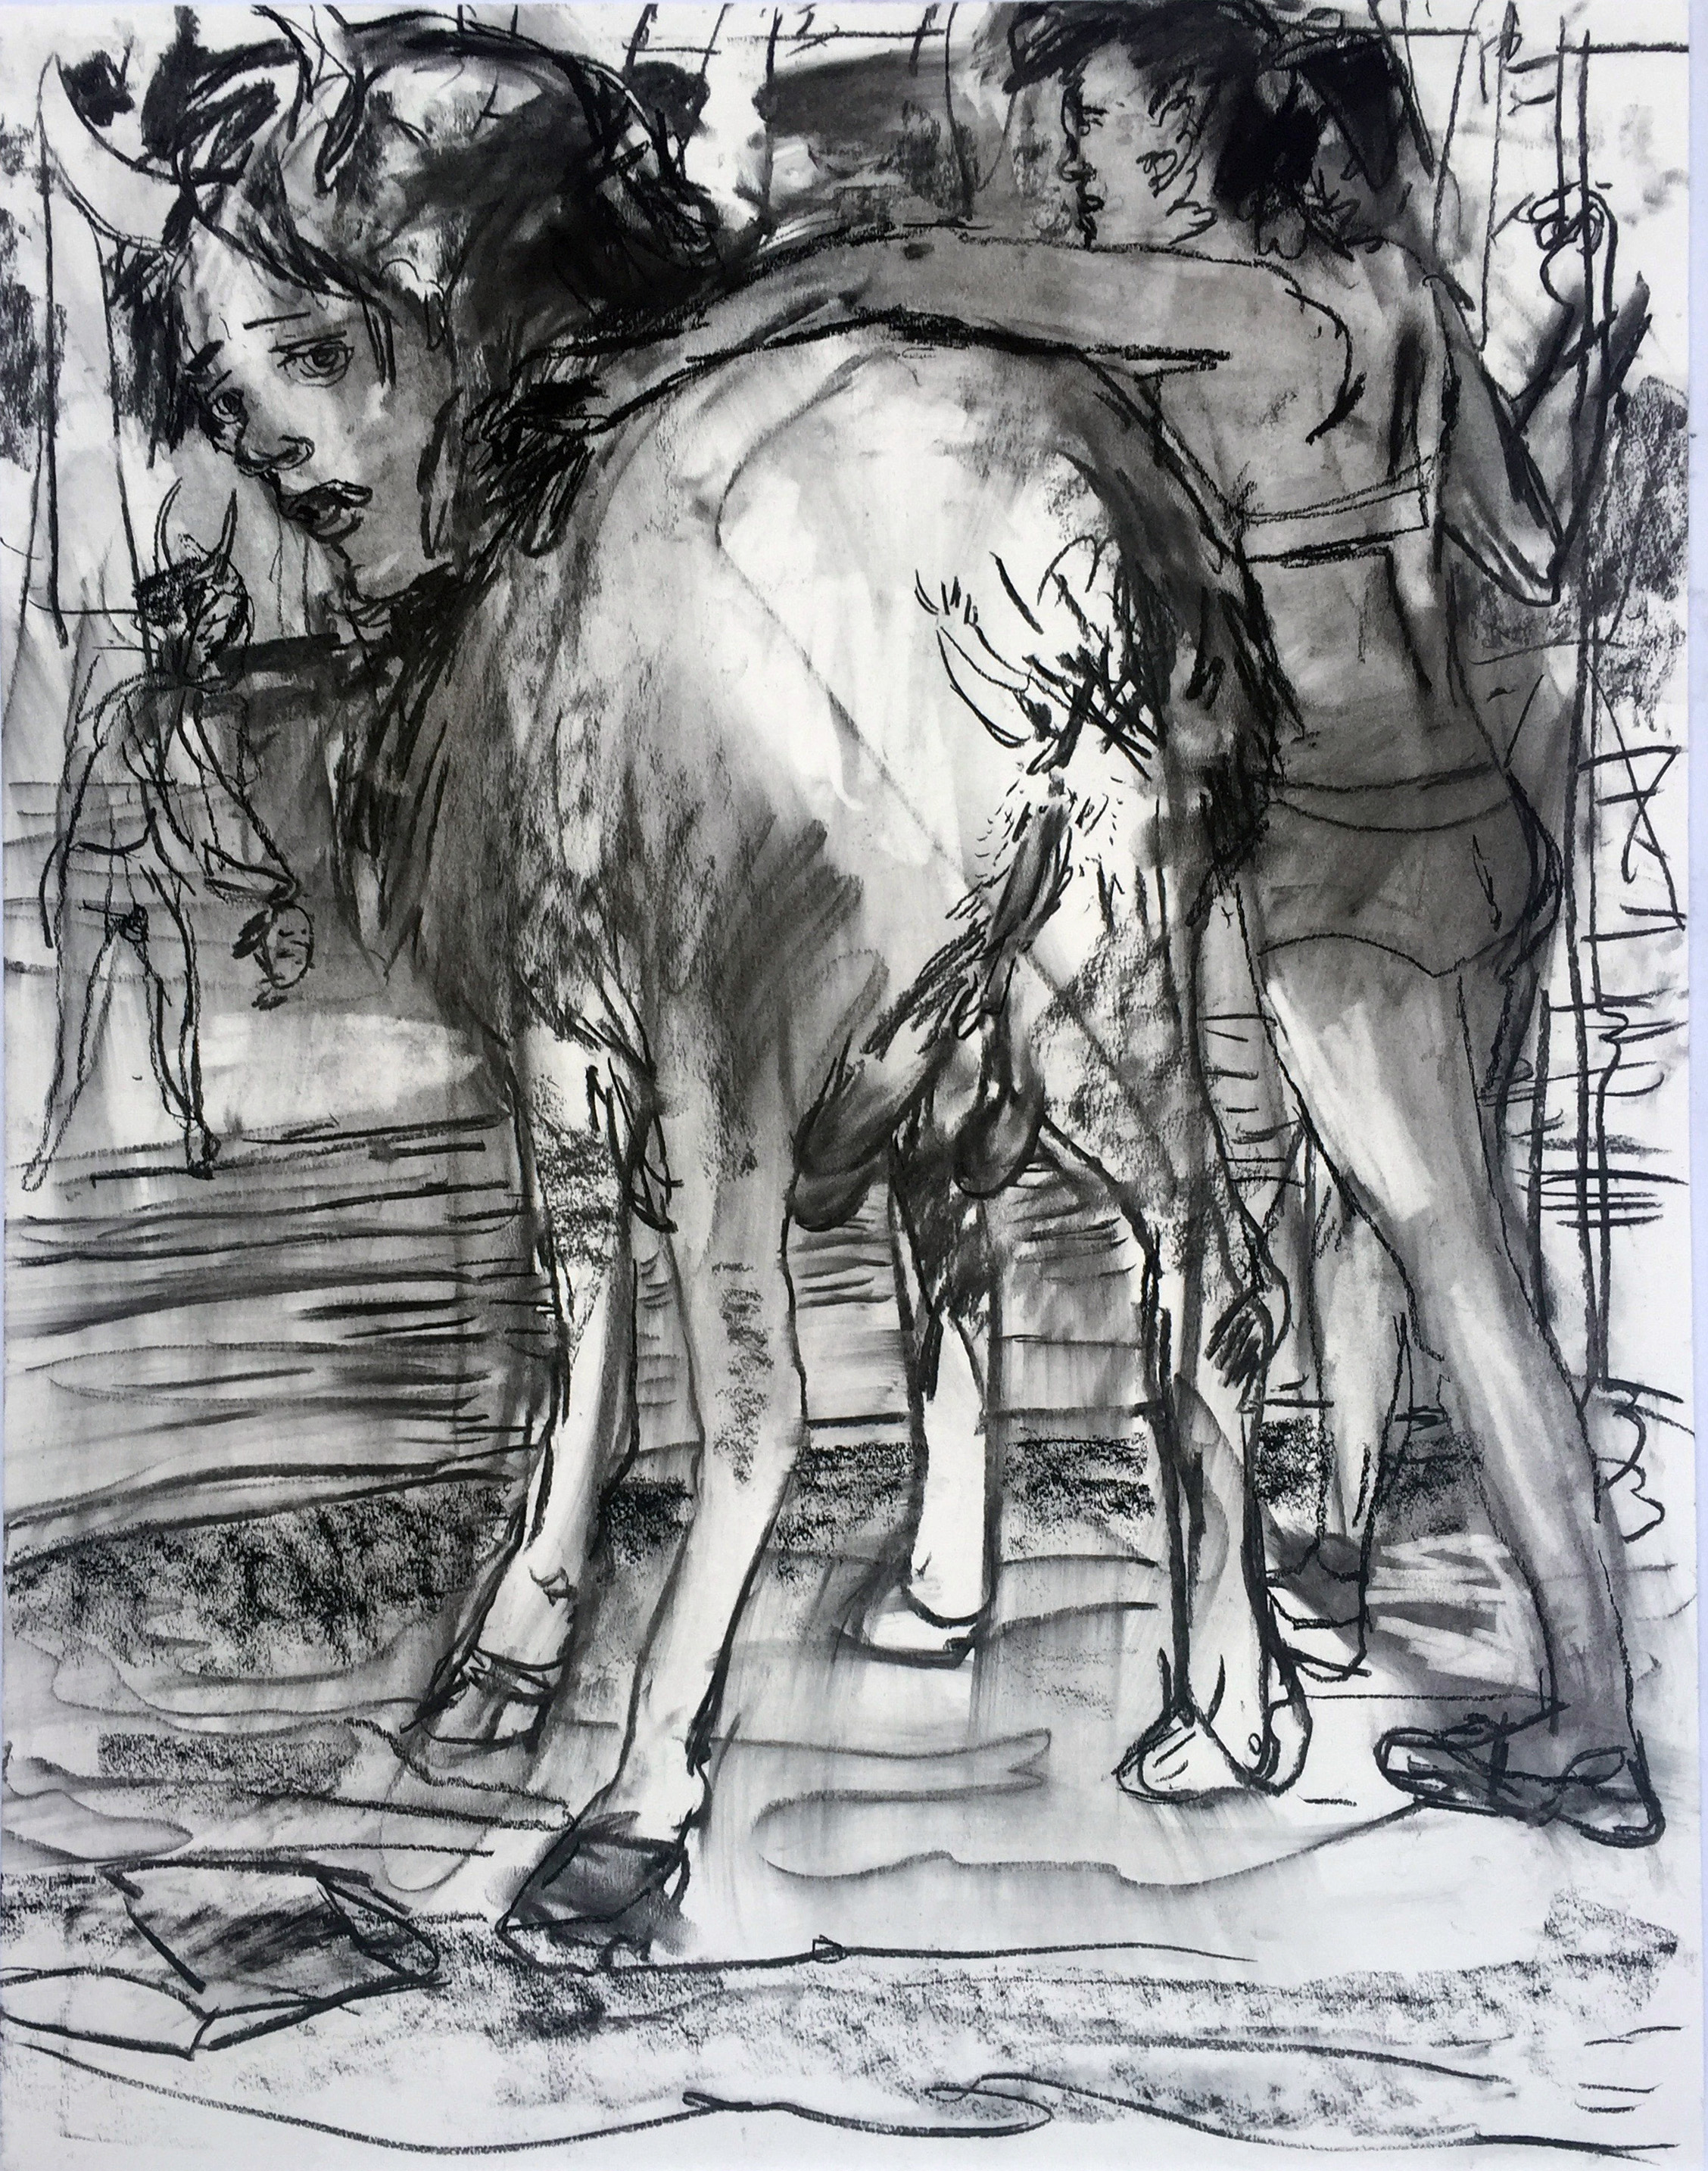 Horny Goatlady 18 by 24 inches charcoal on paper 2017.jpg